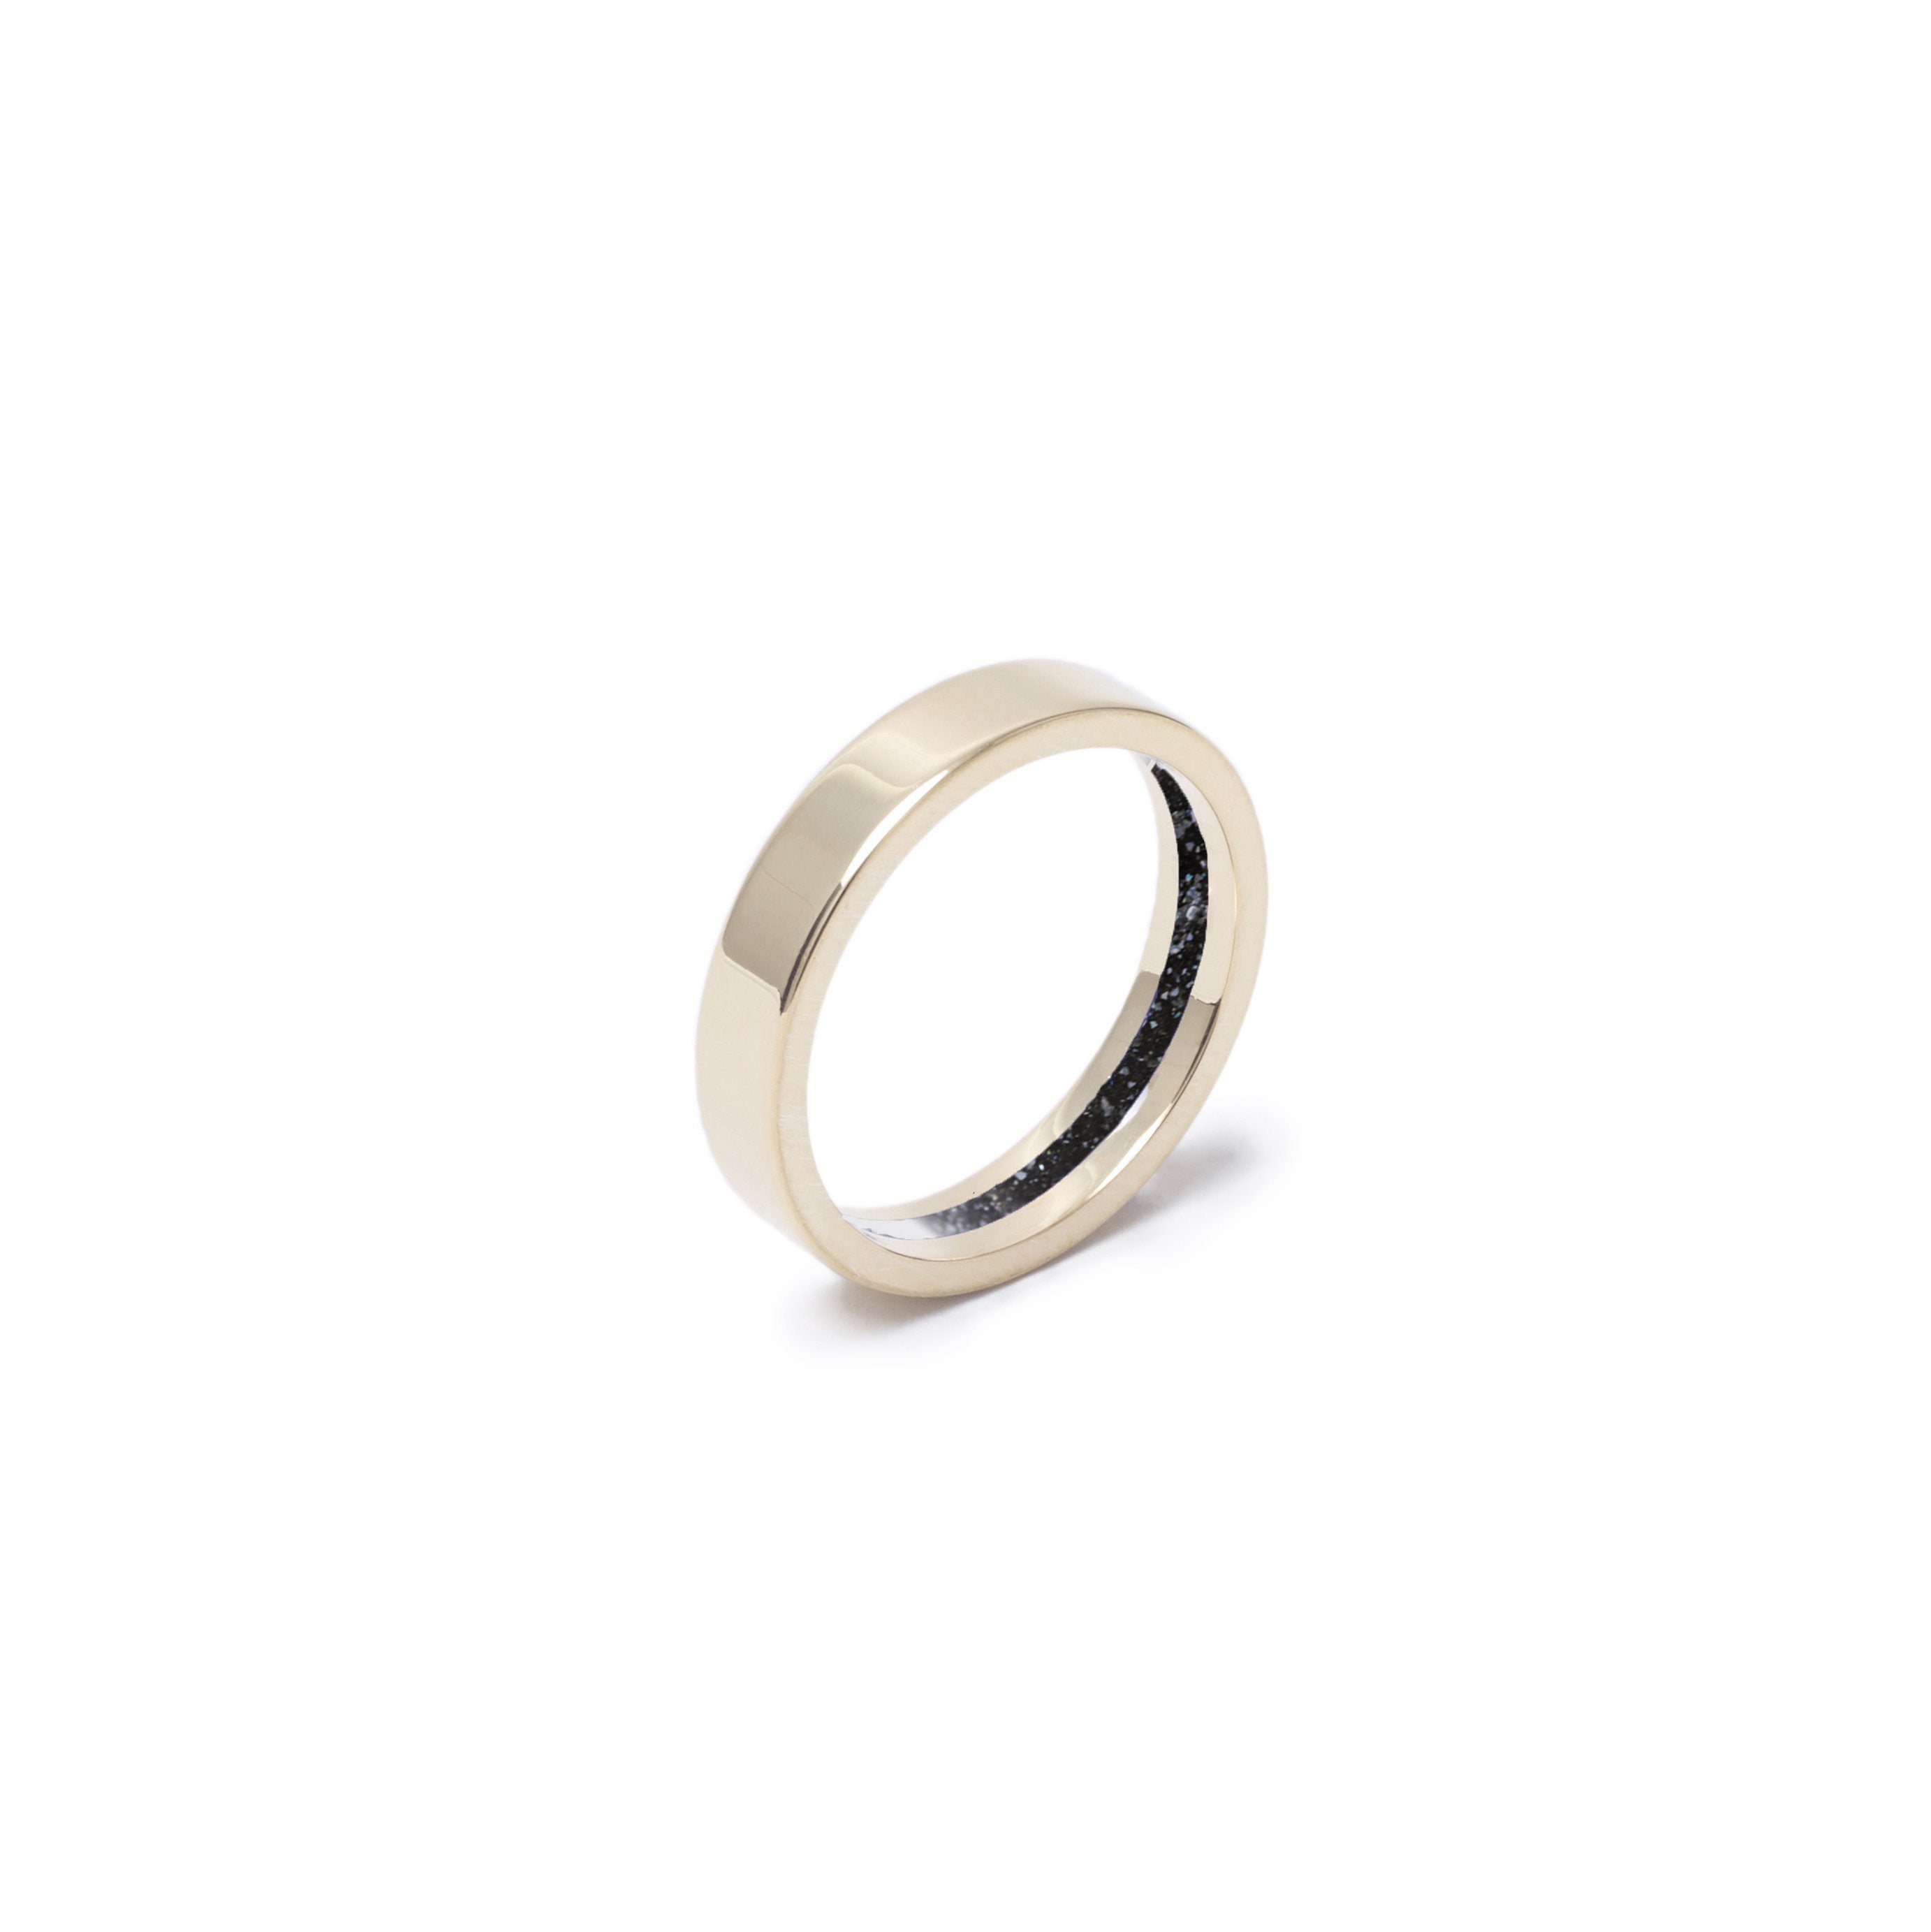 Everence Ring, 10k Yellow Gold everence.life 4mm Charcoal 